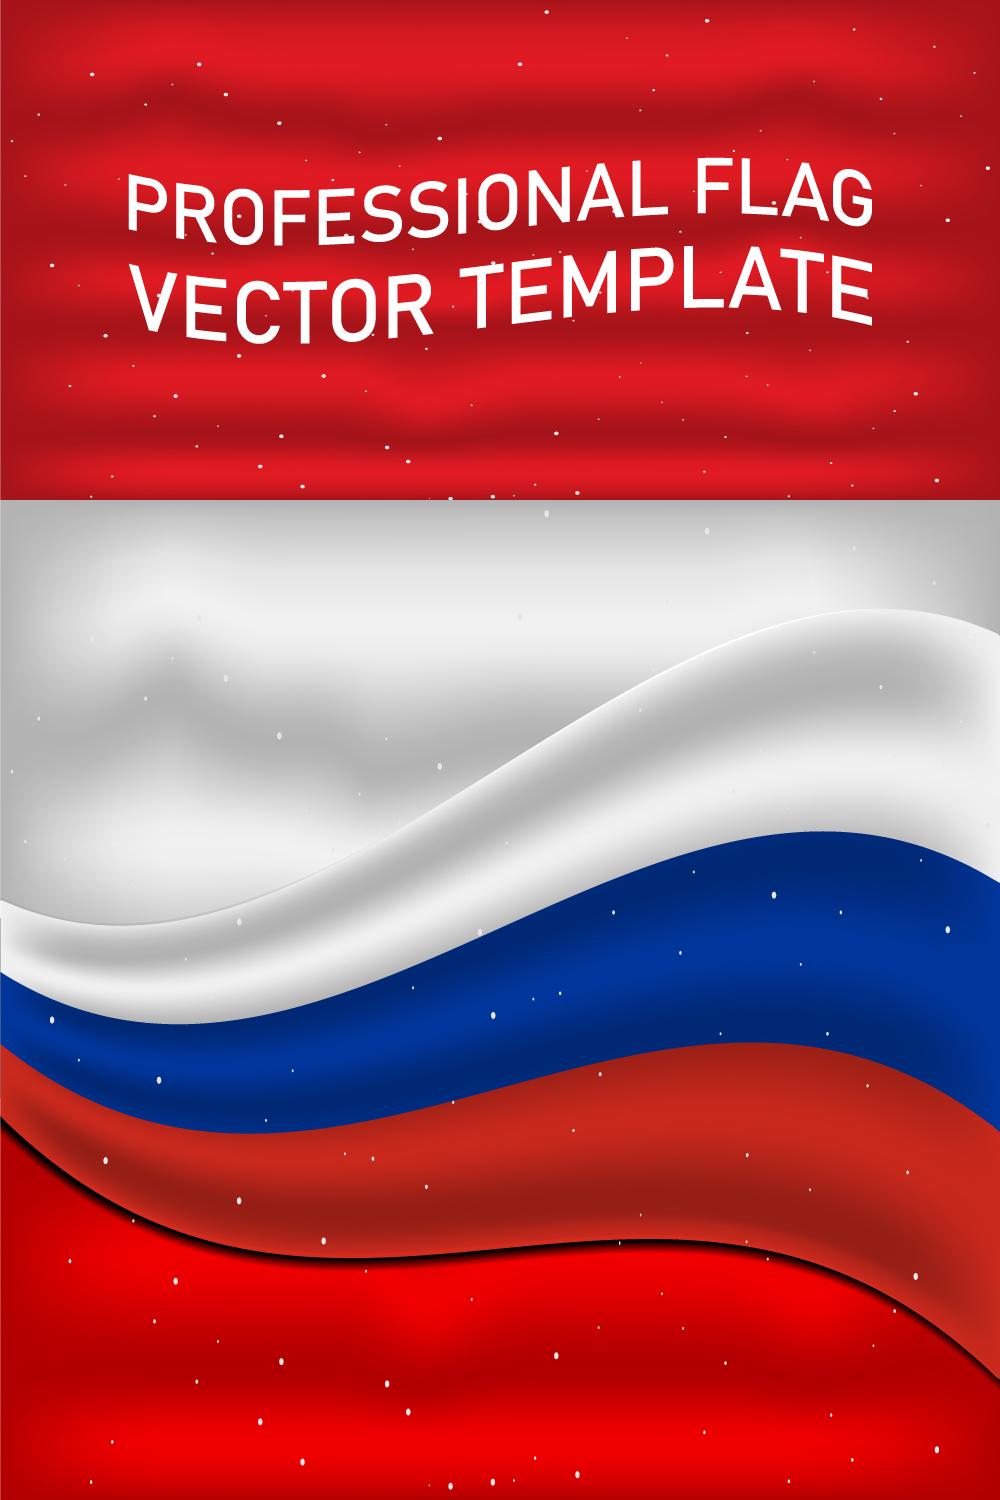 Exquisite image of the flag of Russia.